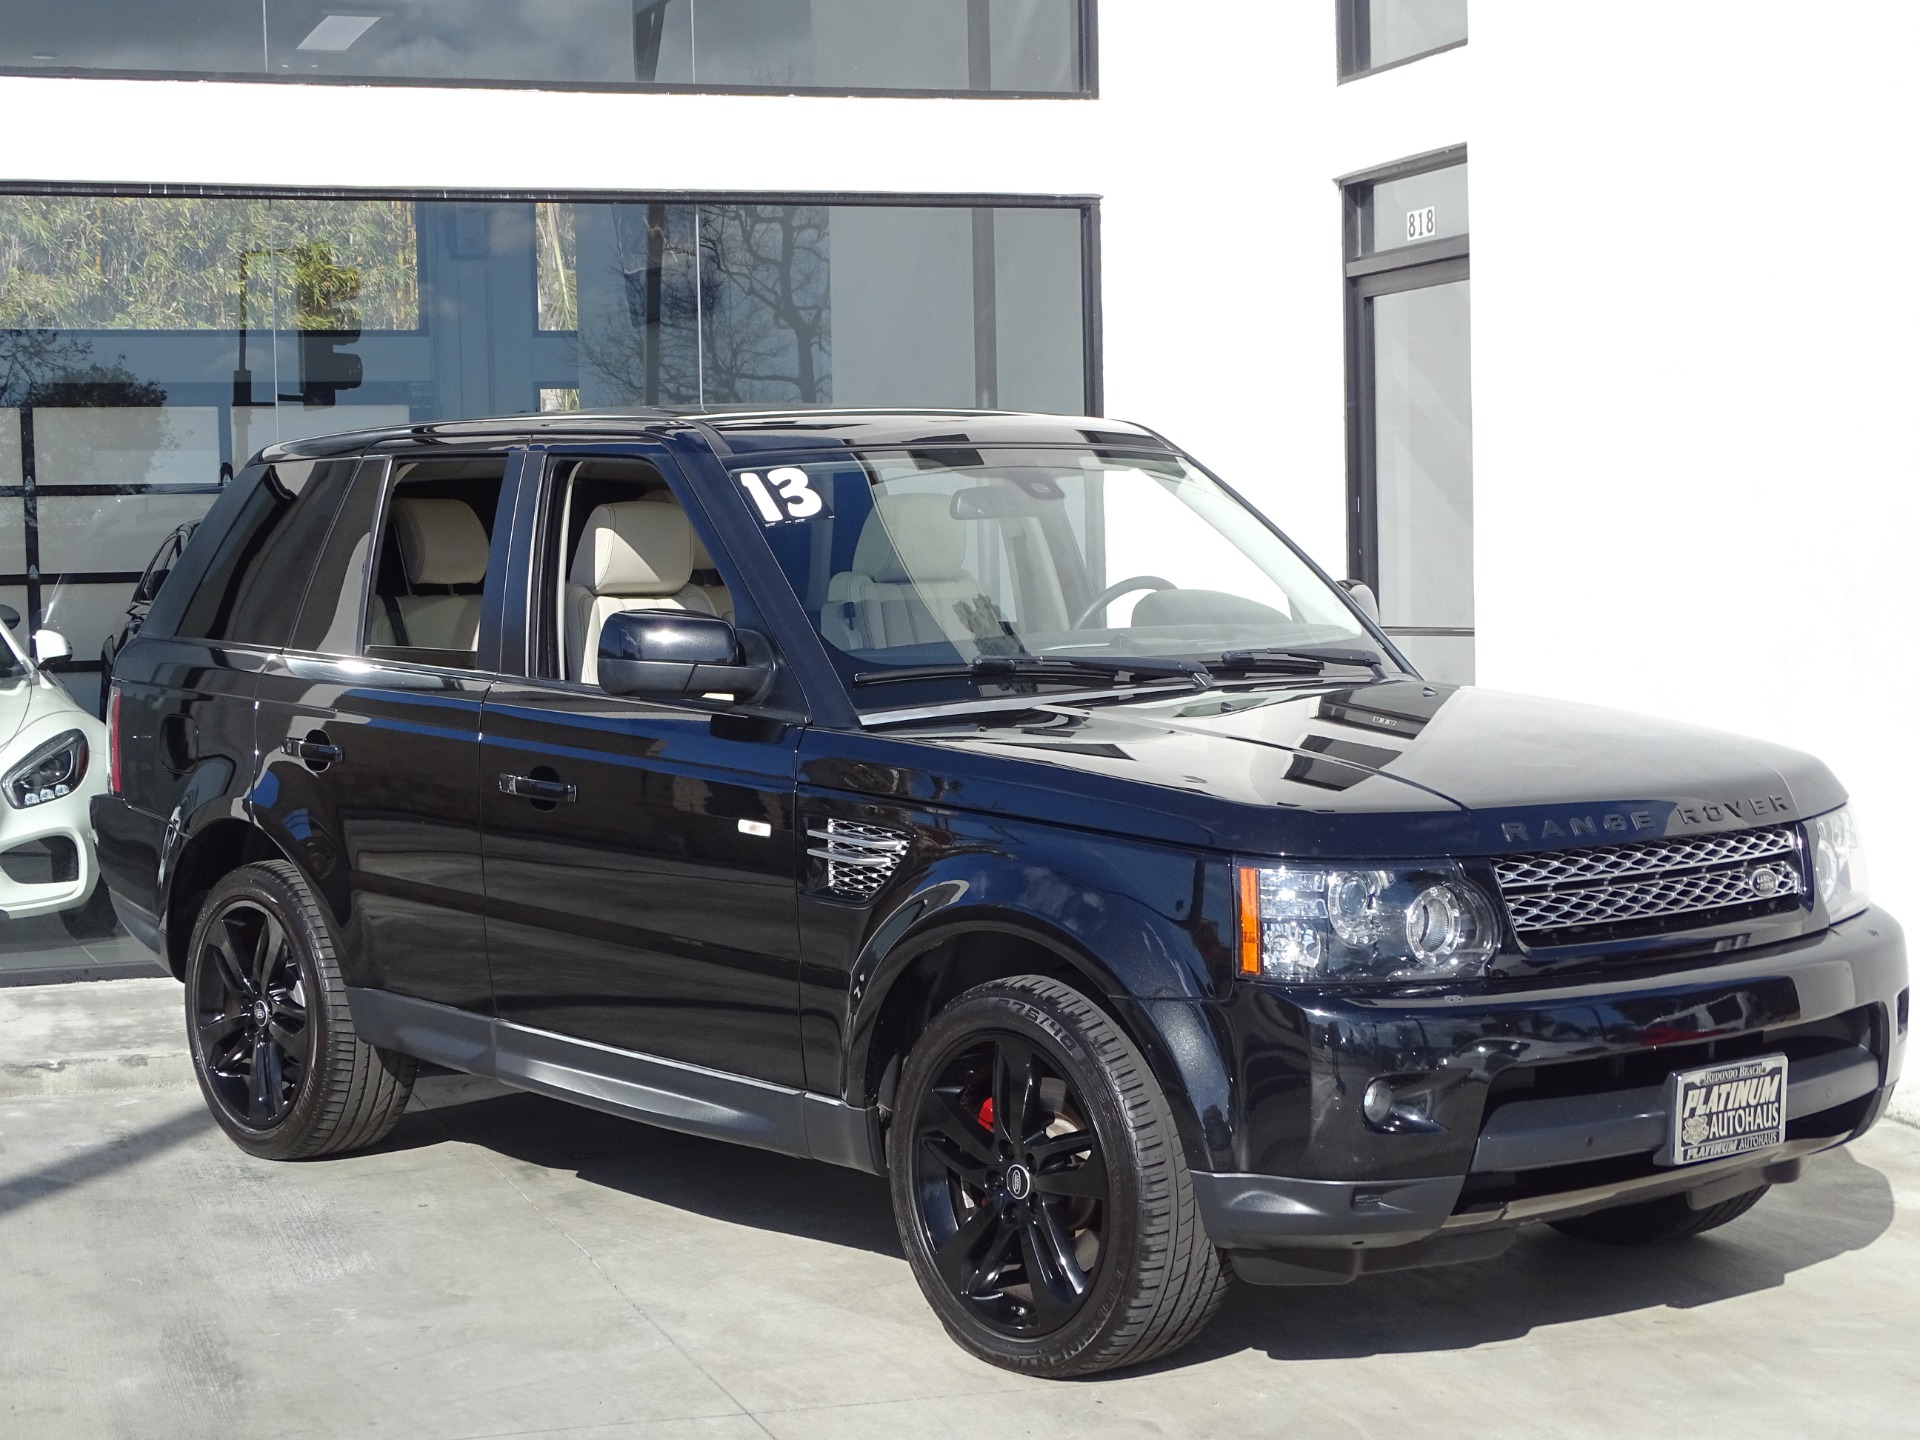 Welsprekend Vies Lunch 2013 Land Rover Range Rover Sport HSE LUX Stock # 6409A for sale near  Redondo Beach, CA | CA Land Rover Dealer